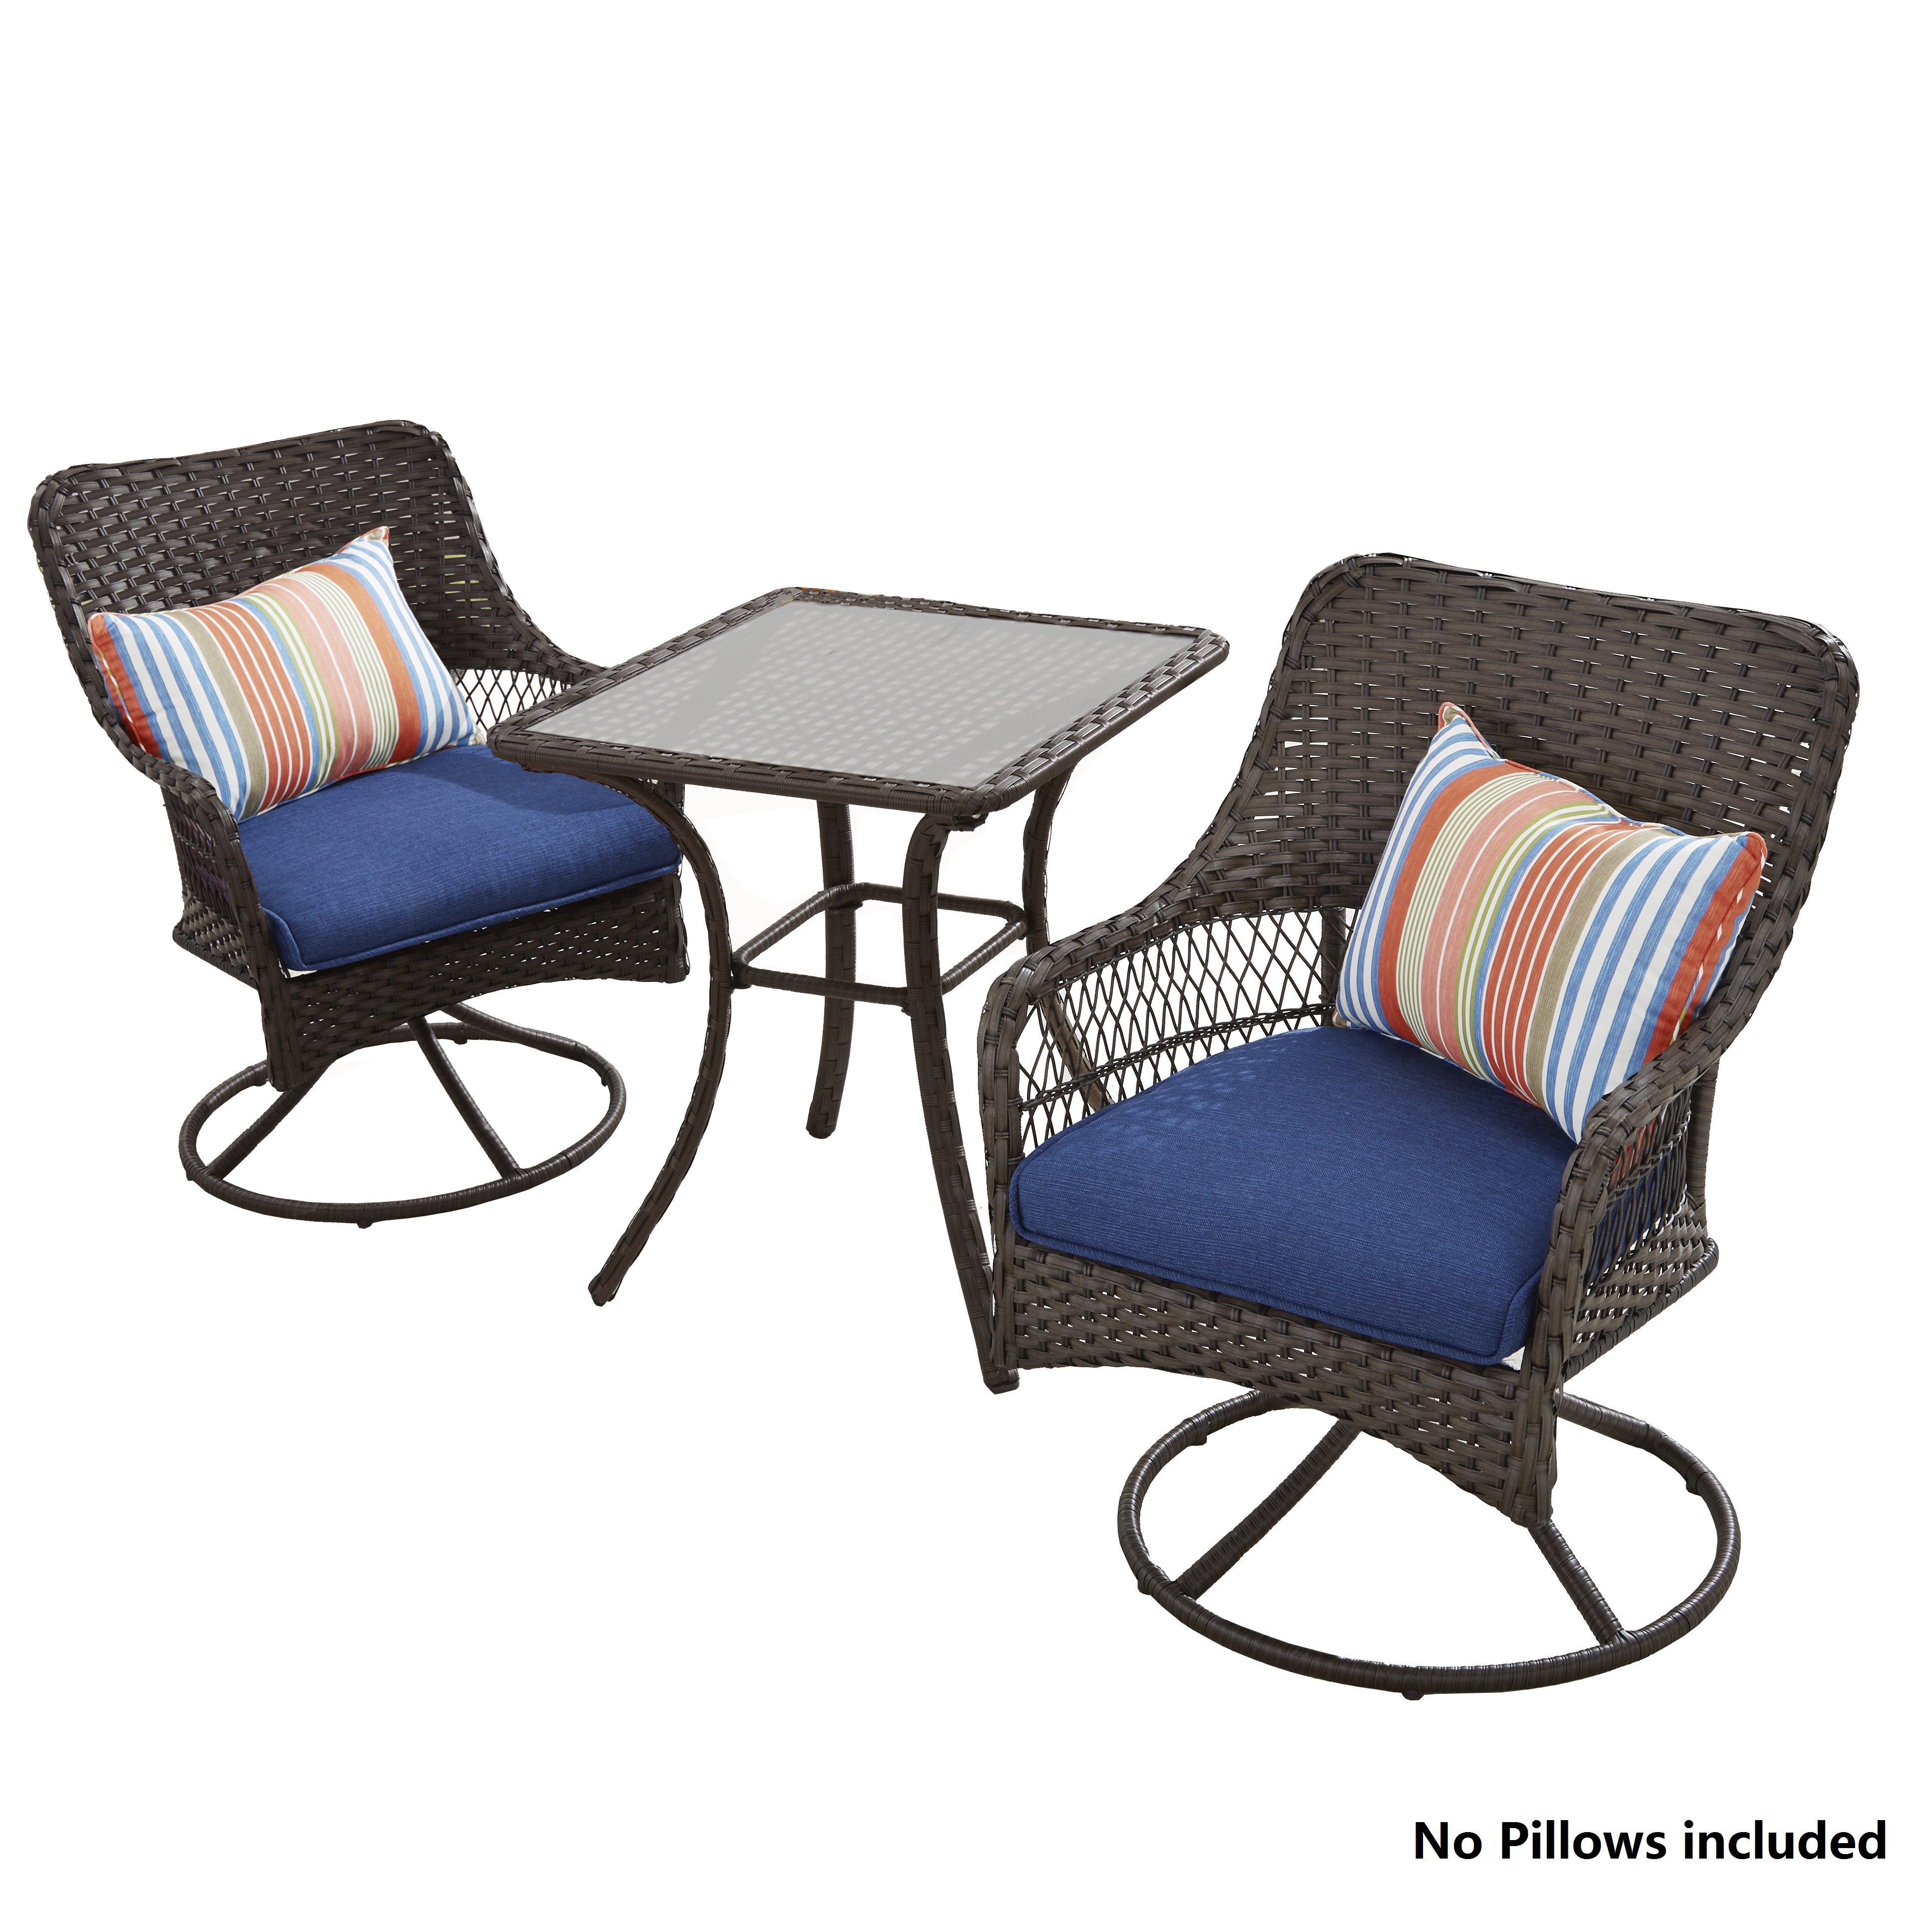 Better Homes and Gardens Colebrook 3 Piece Outdoor Bistro Set, Seats 2 - image 1 of 8